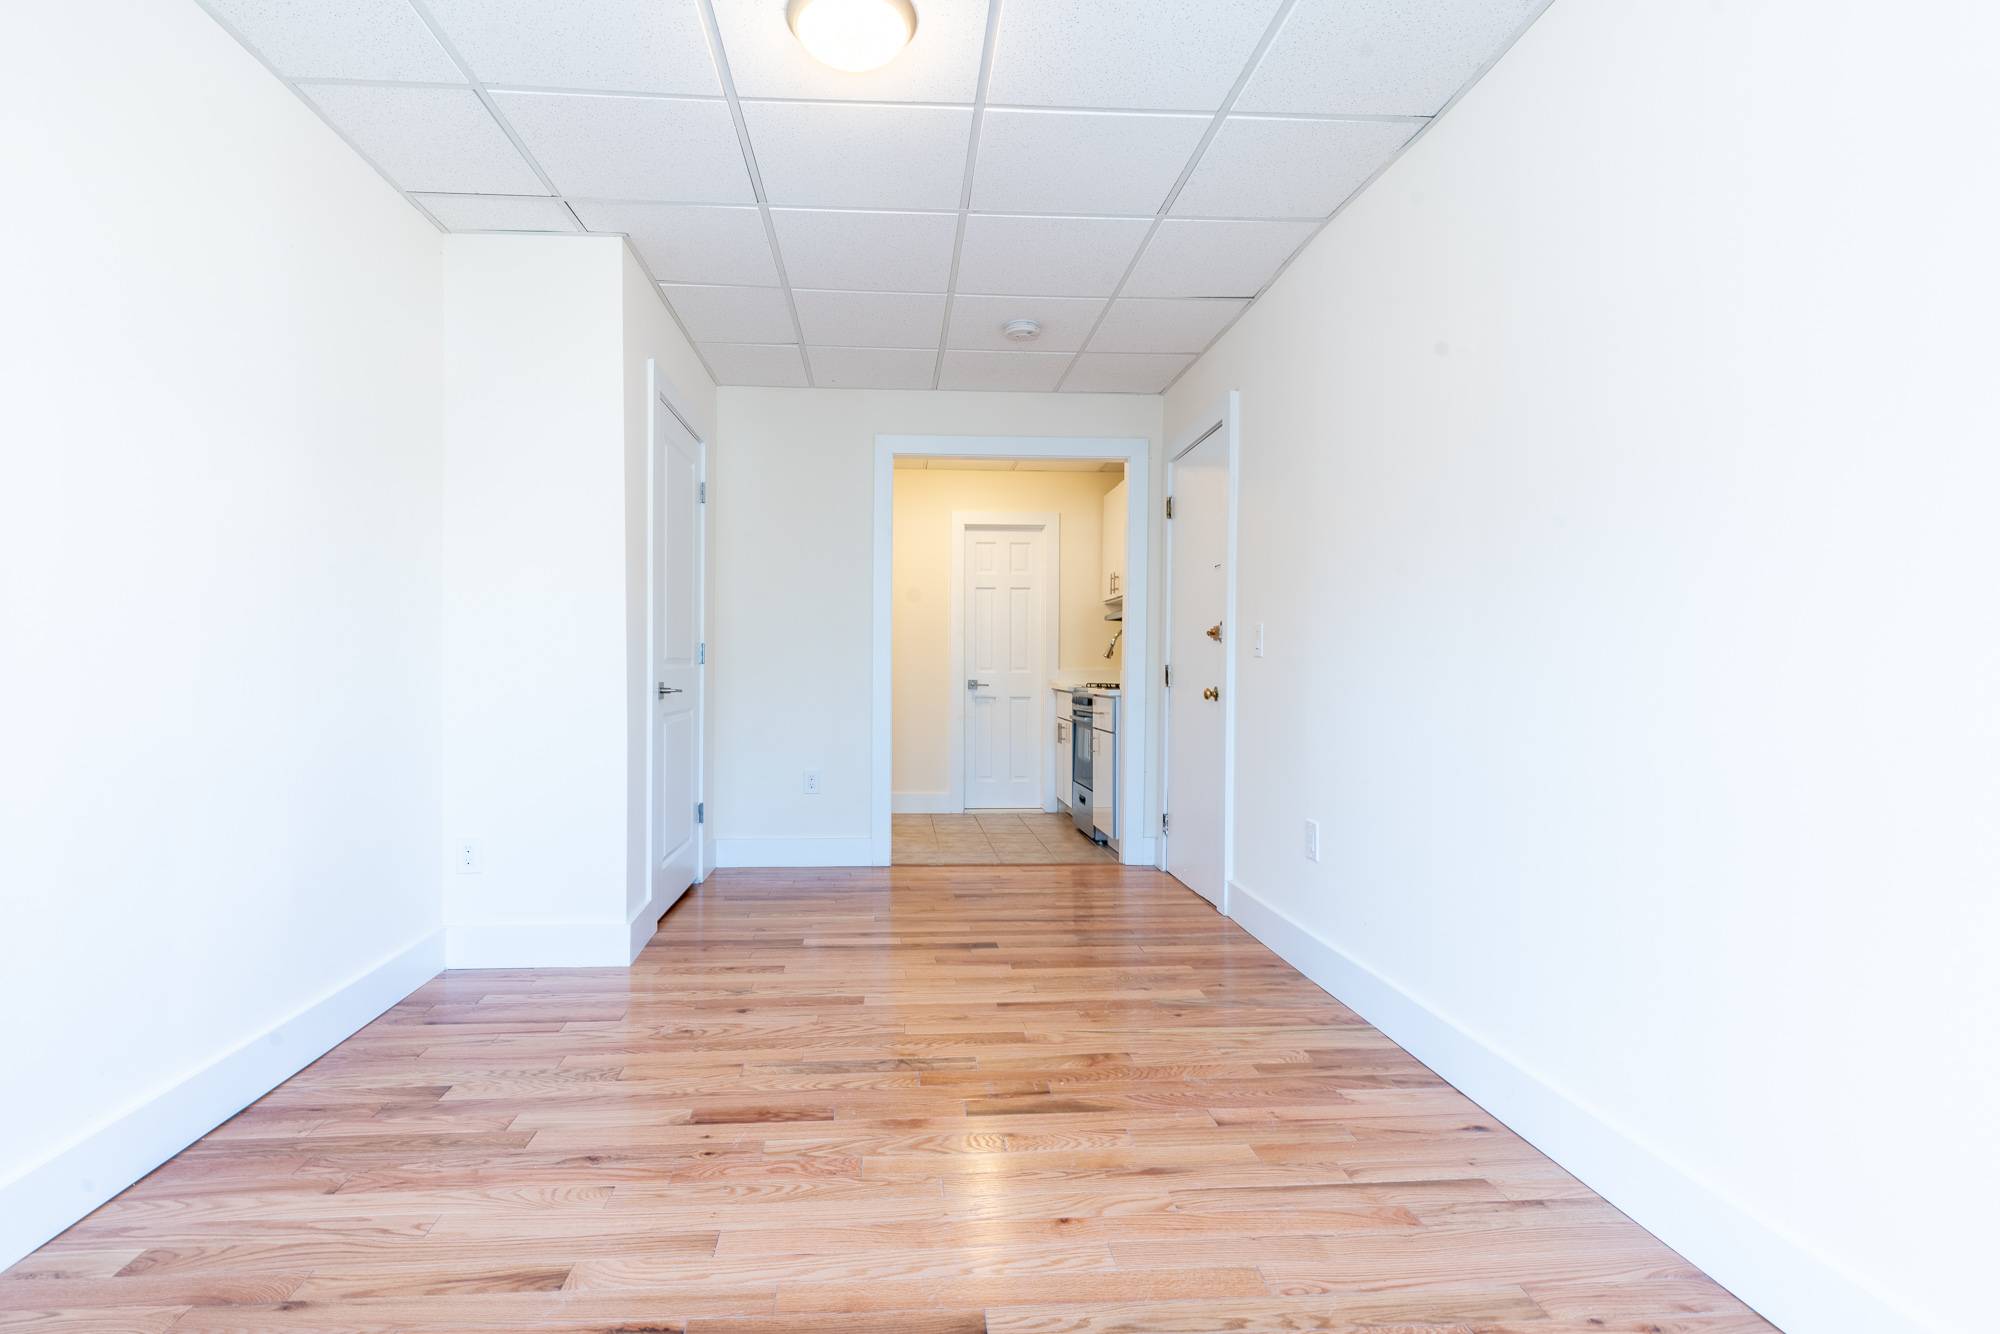 Studio  in Prime Journal Square Location! Laundry on Site, Seconds to the Journal Square Path Transportation Center!